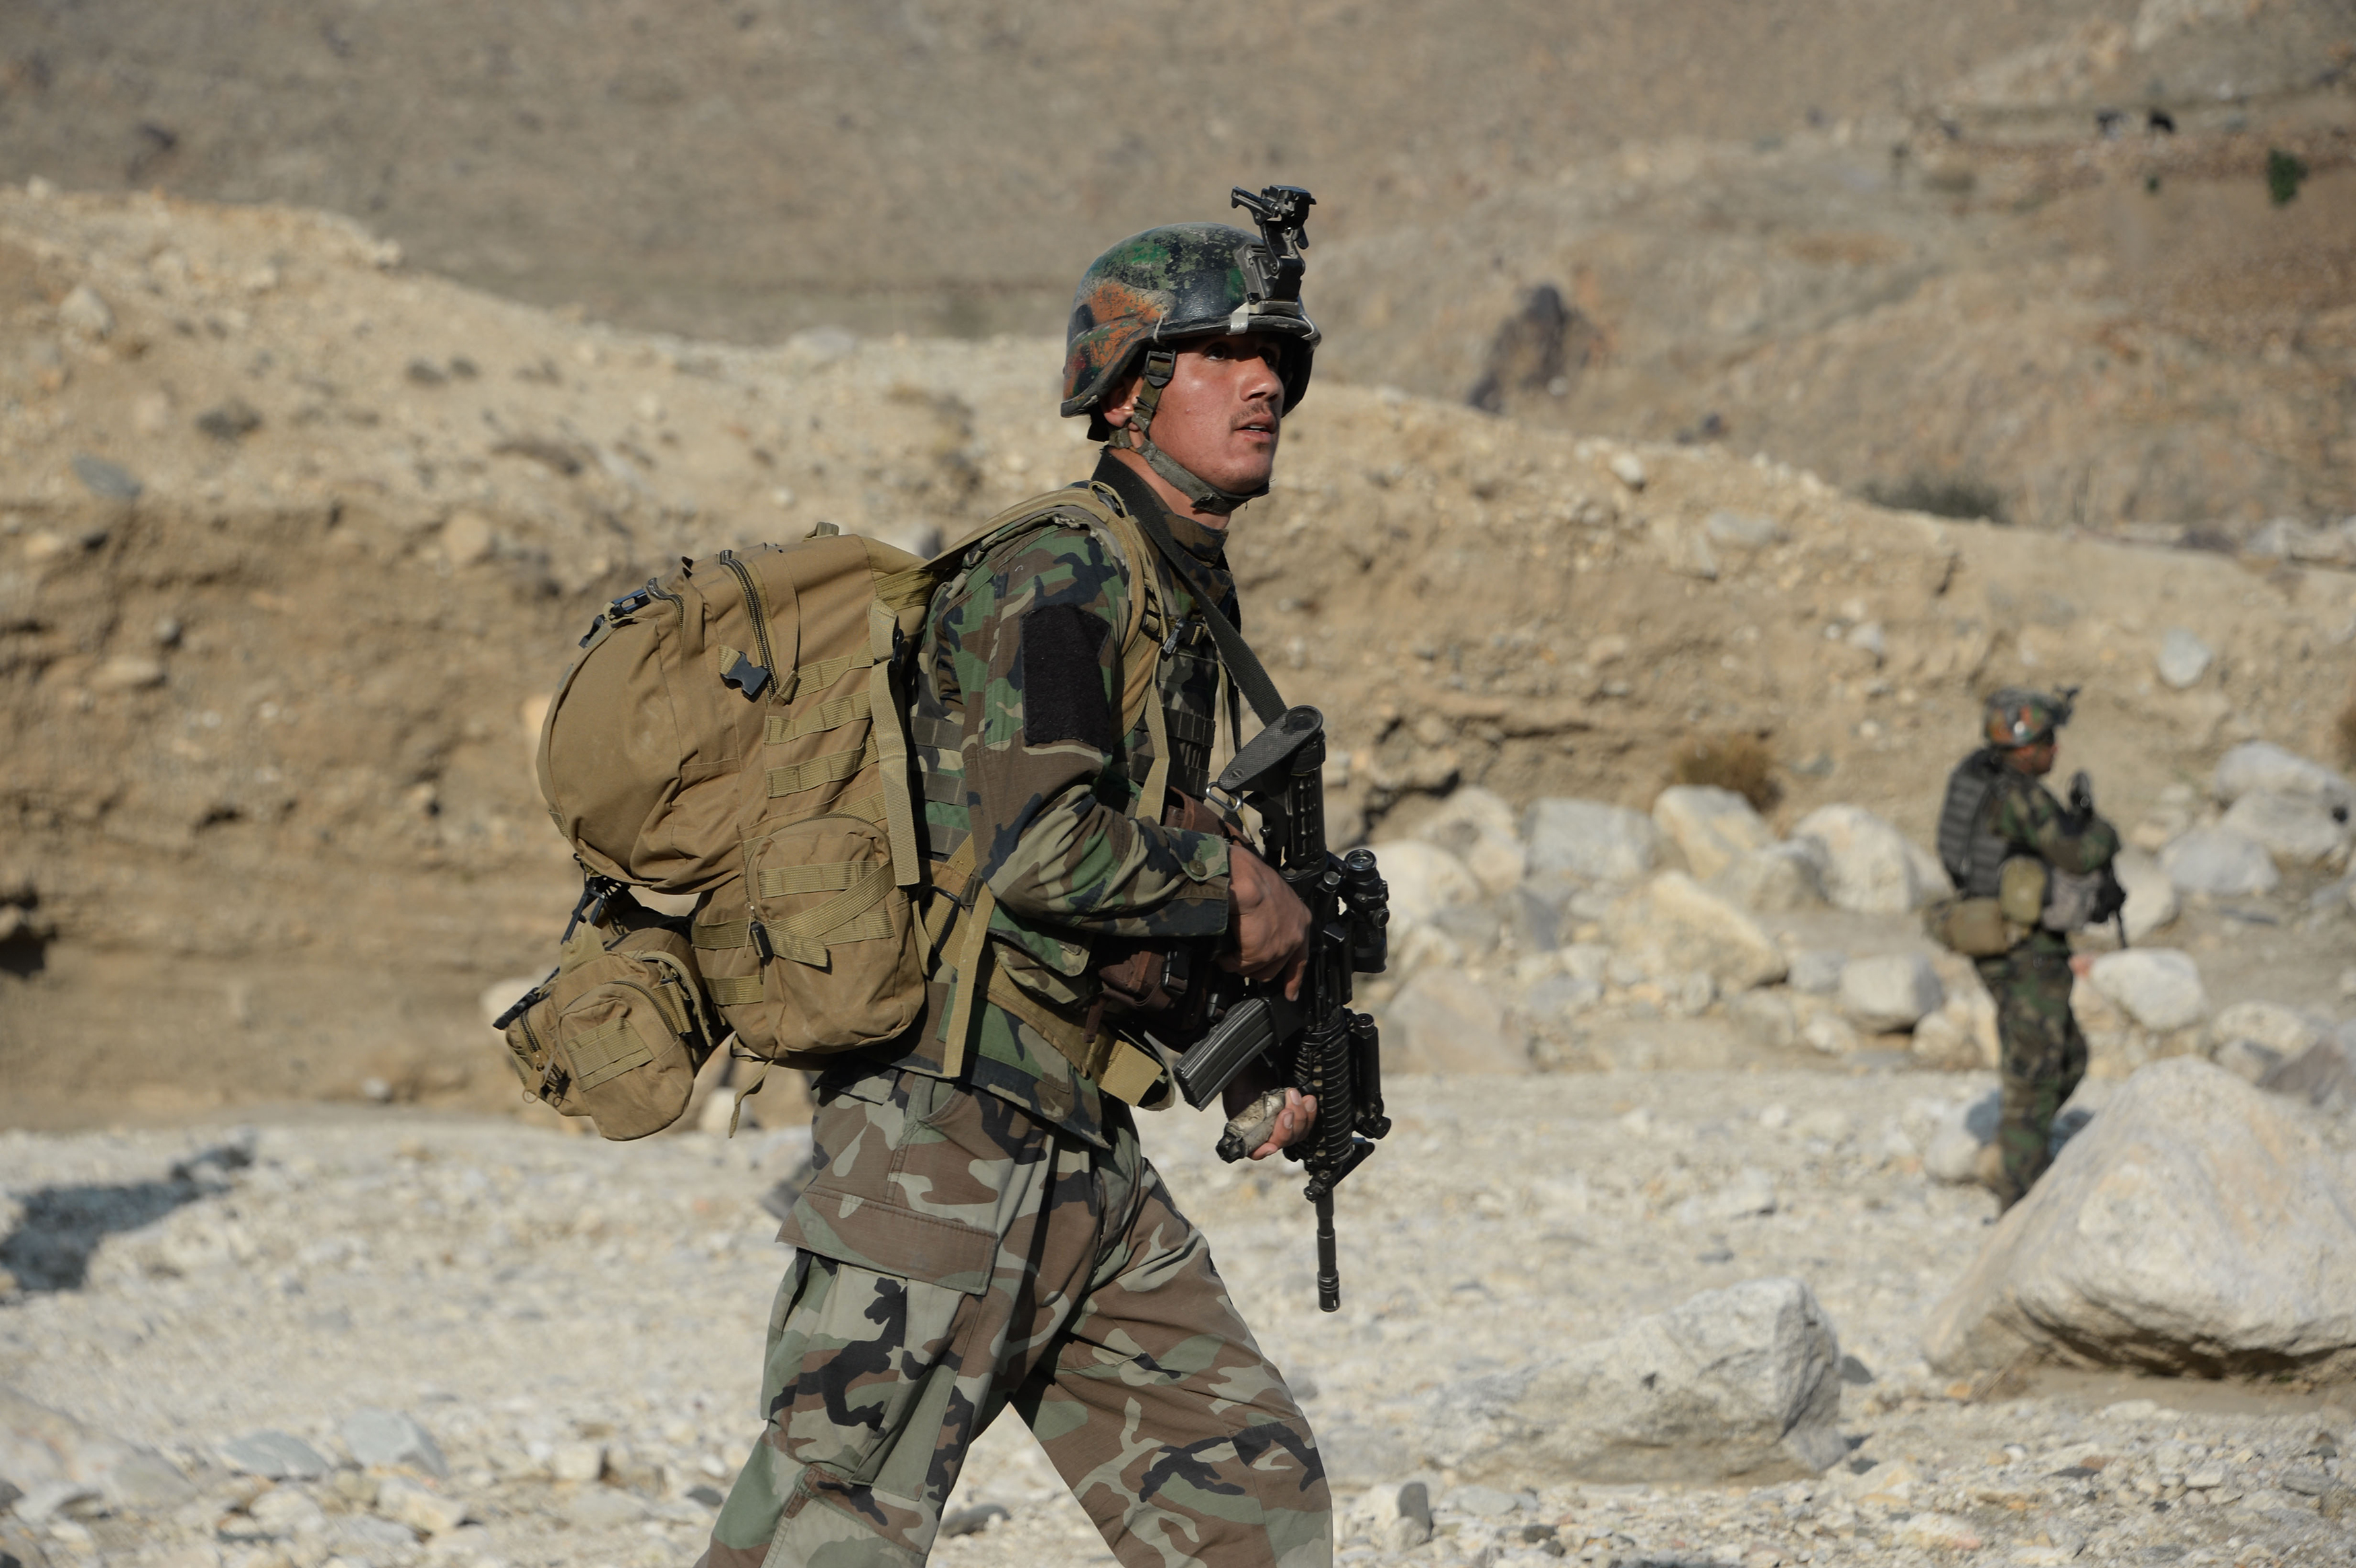 In this photograph taken on January 3, 2018, Afghan commandos forces patrol during ongoing US-Afghan military operation against Islamic State militants in Achin district of Nangarhar province. Afghan security forces are conducting most of the fighting against the Taliban and other insurgent groups as US troops operate alongside them in a training capacity and are frequently on the front lines. / AFP PHOTO / NOORULLAH SHIRZADA (Photo credit should read NOORULLAH SHIRZADA/AFP via Getty Images)